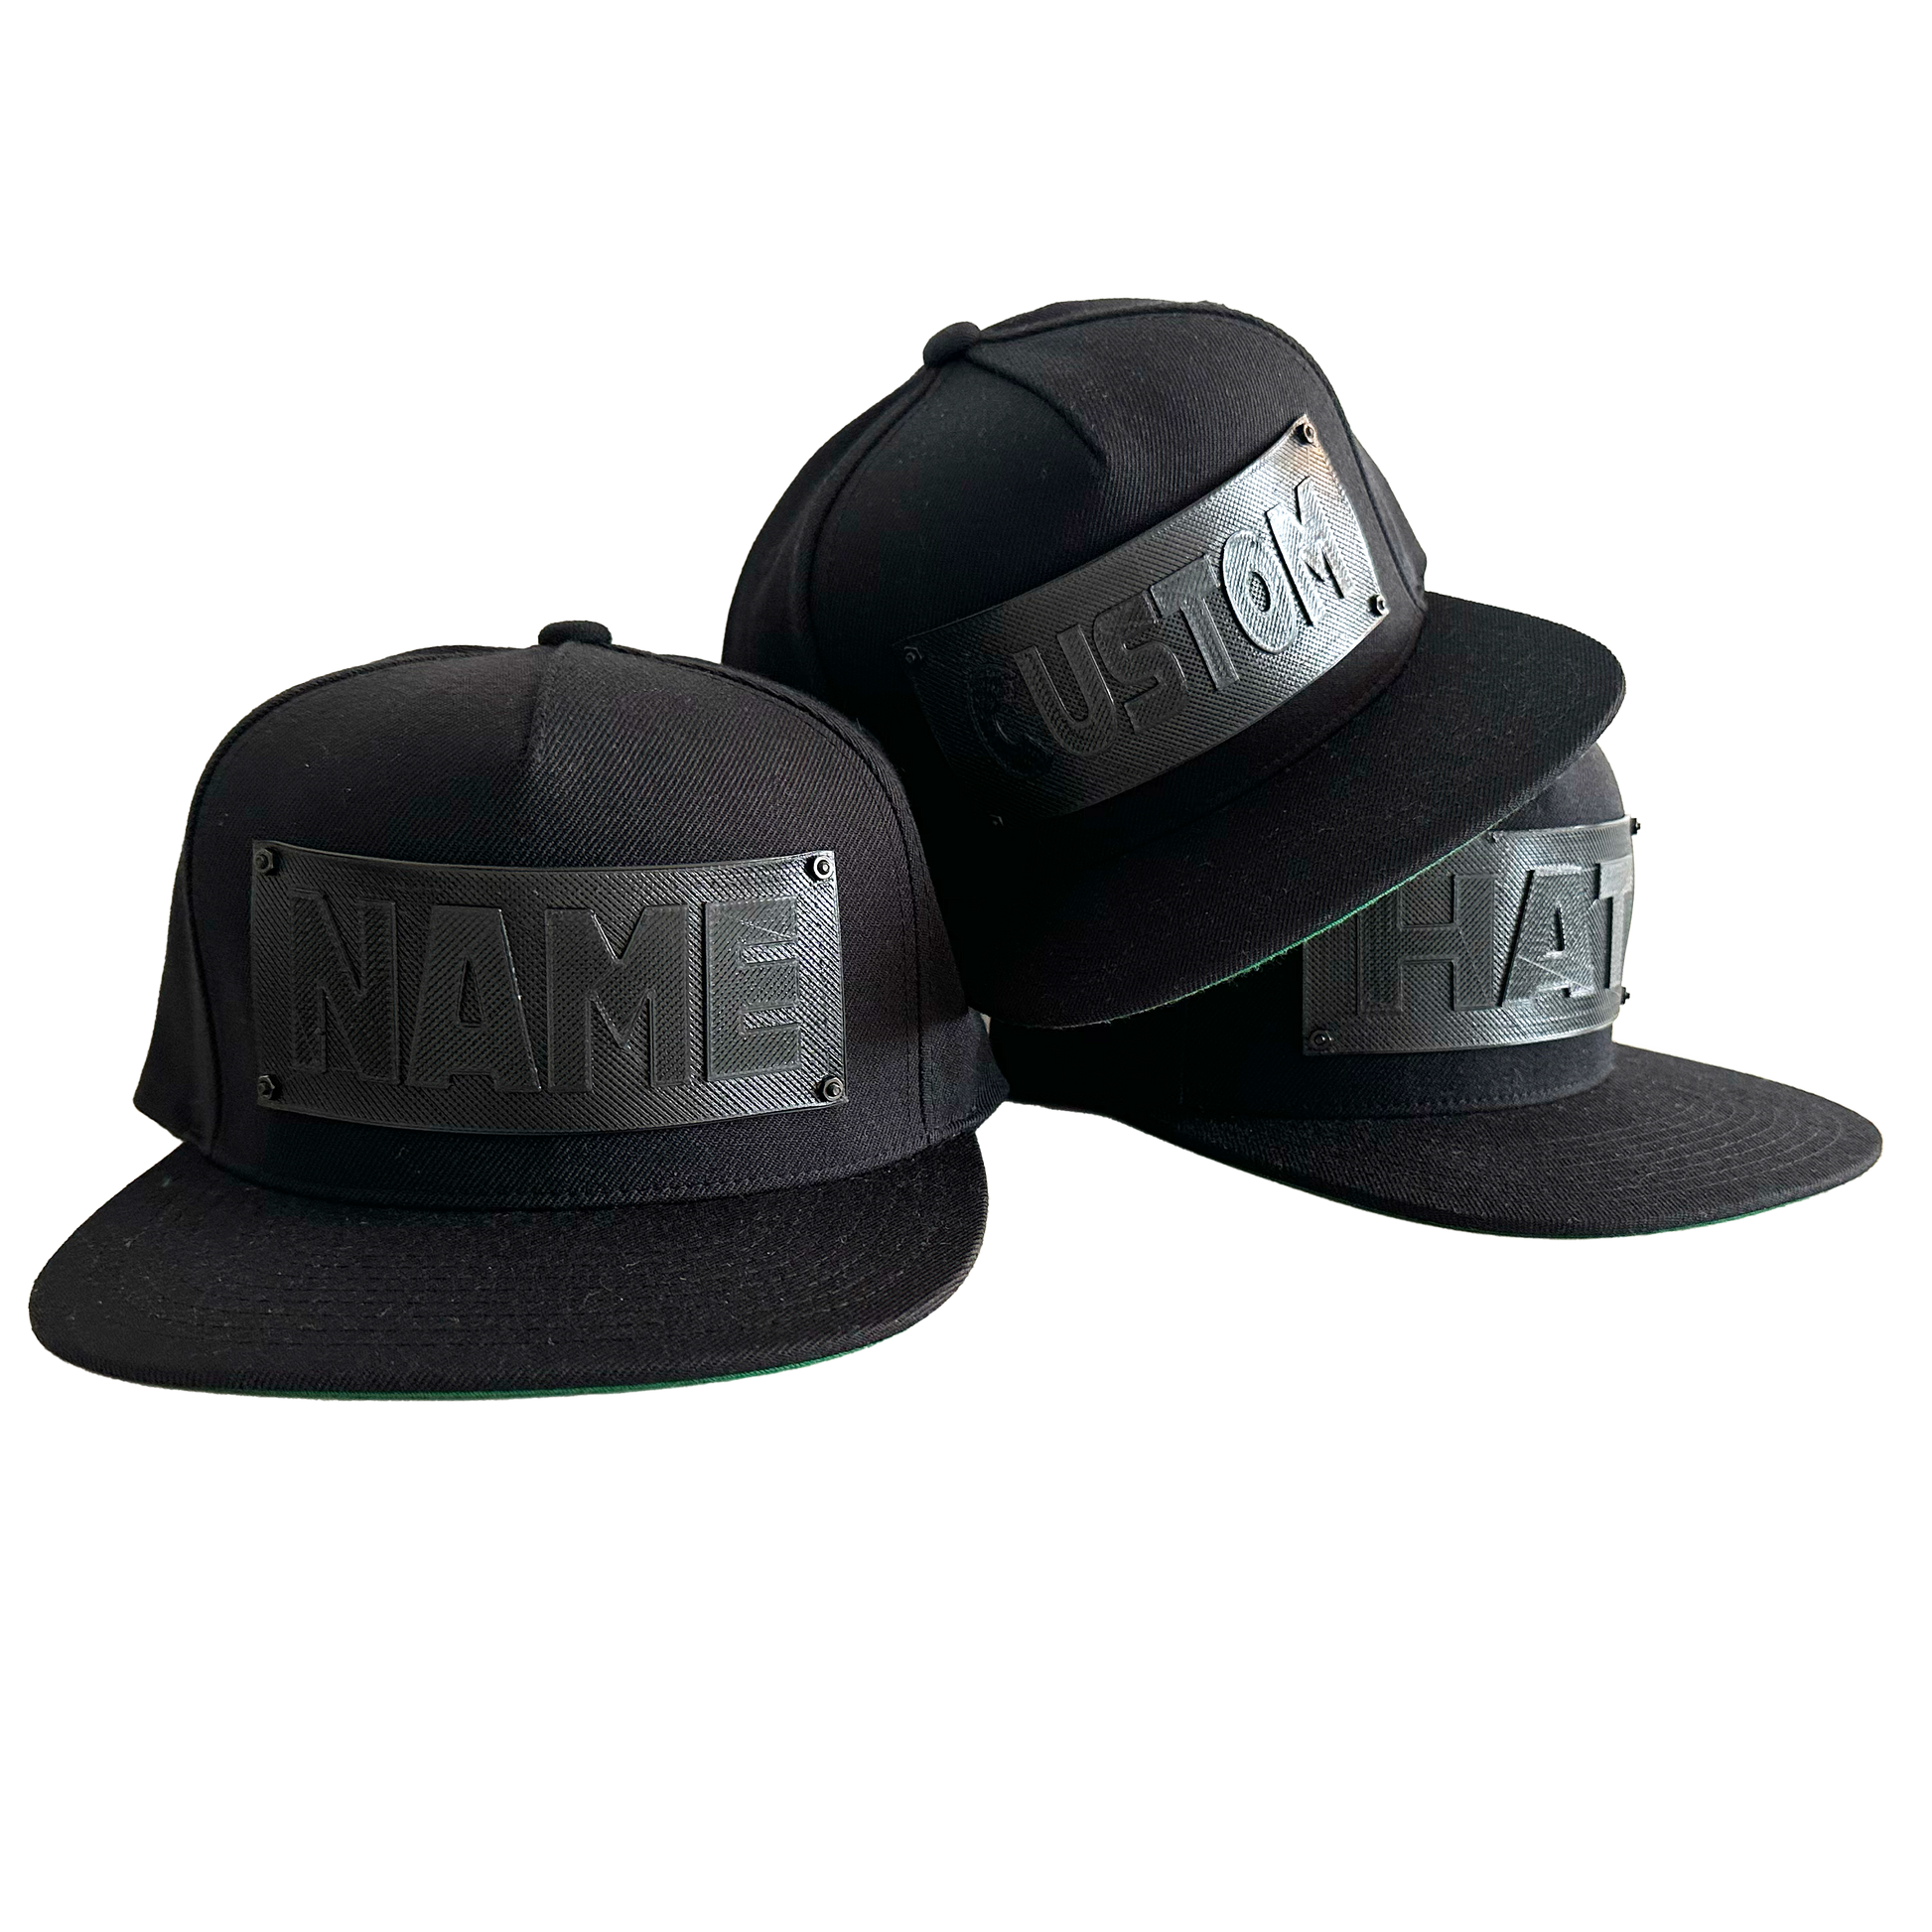 3 snapback baseball caps in black with black 3D printed logo panels. One says "CUSTOM",one says NAME", and the third says "HAT". 